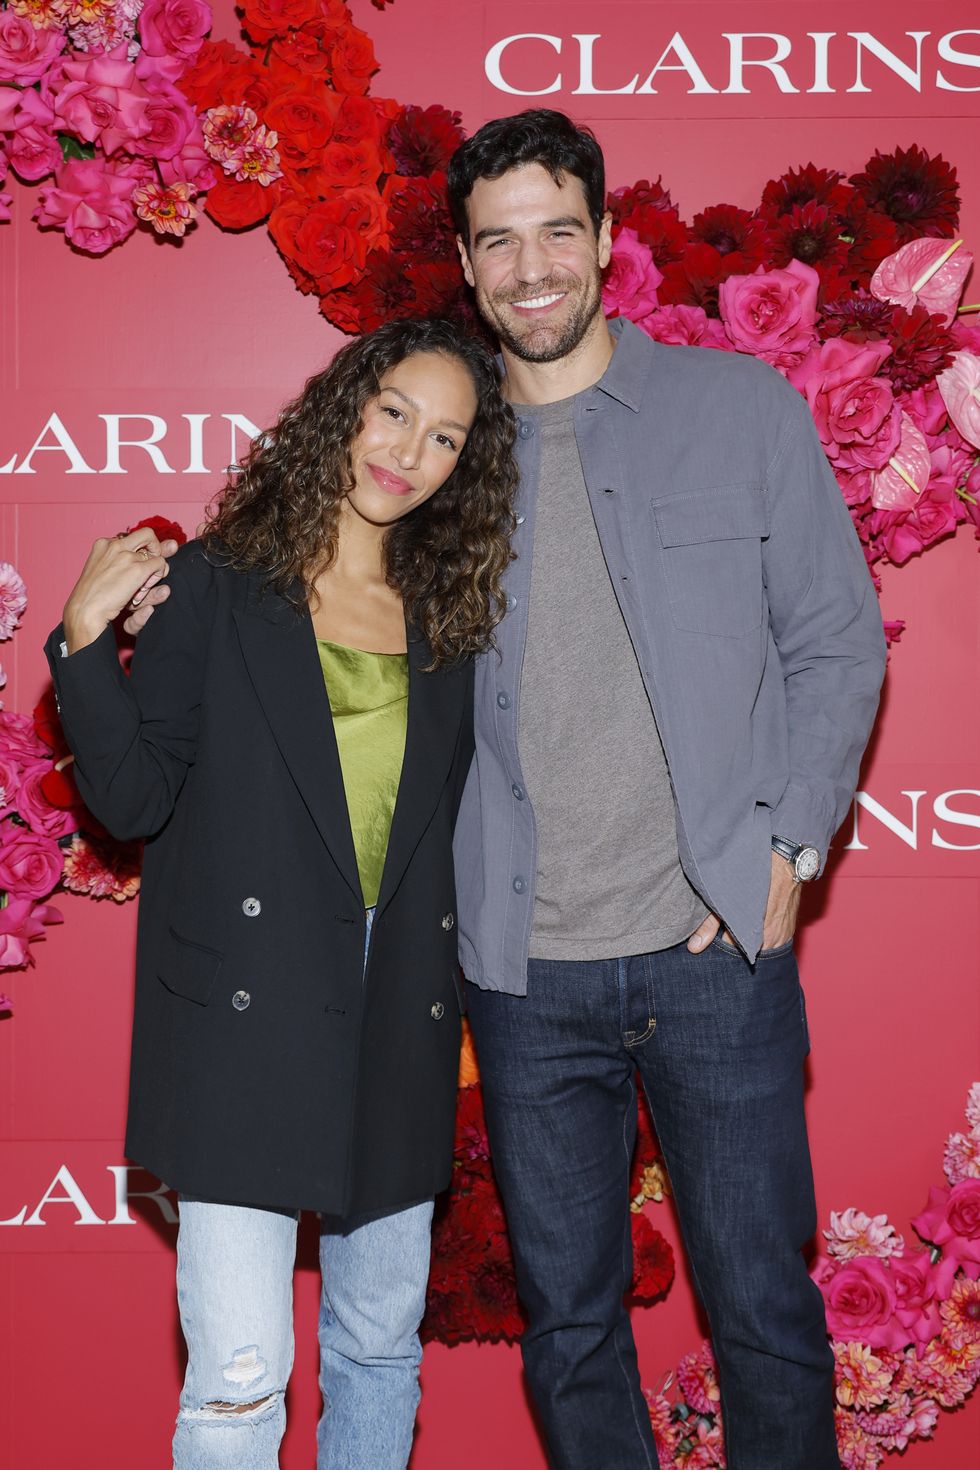 clarins celebrates their best of beauty products cocktail party